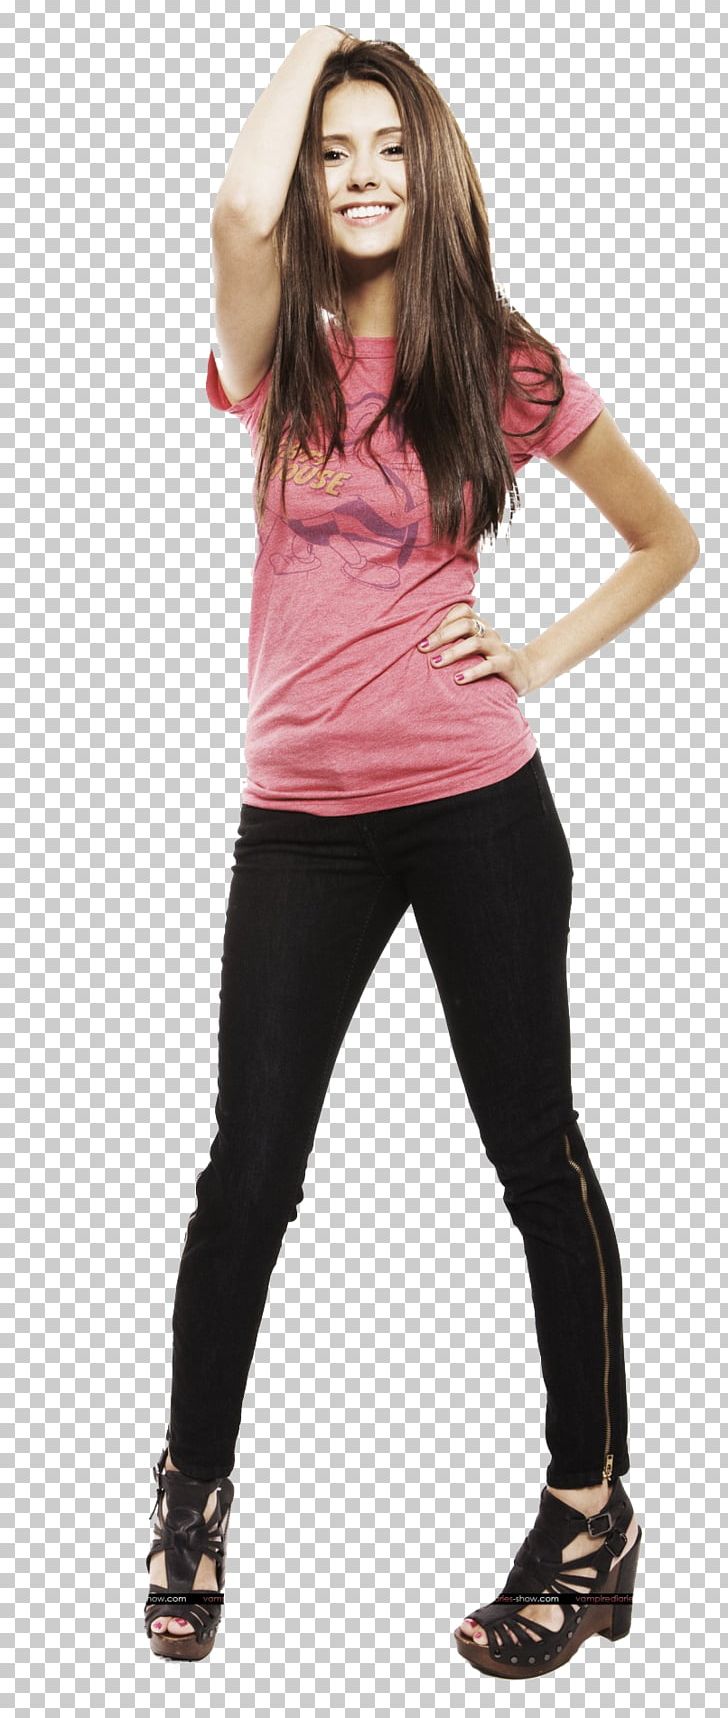 Nina Dobrev The Vampire Diaries Model Actor Photo Shoot PNG, Clipart, Abdomen, Actor, Arm, Brown , Celebrities Free PNG Download